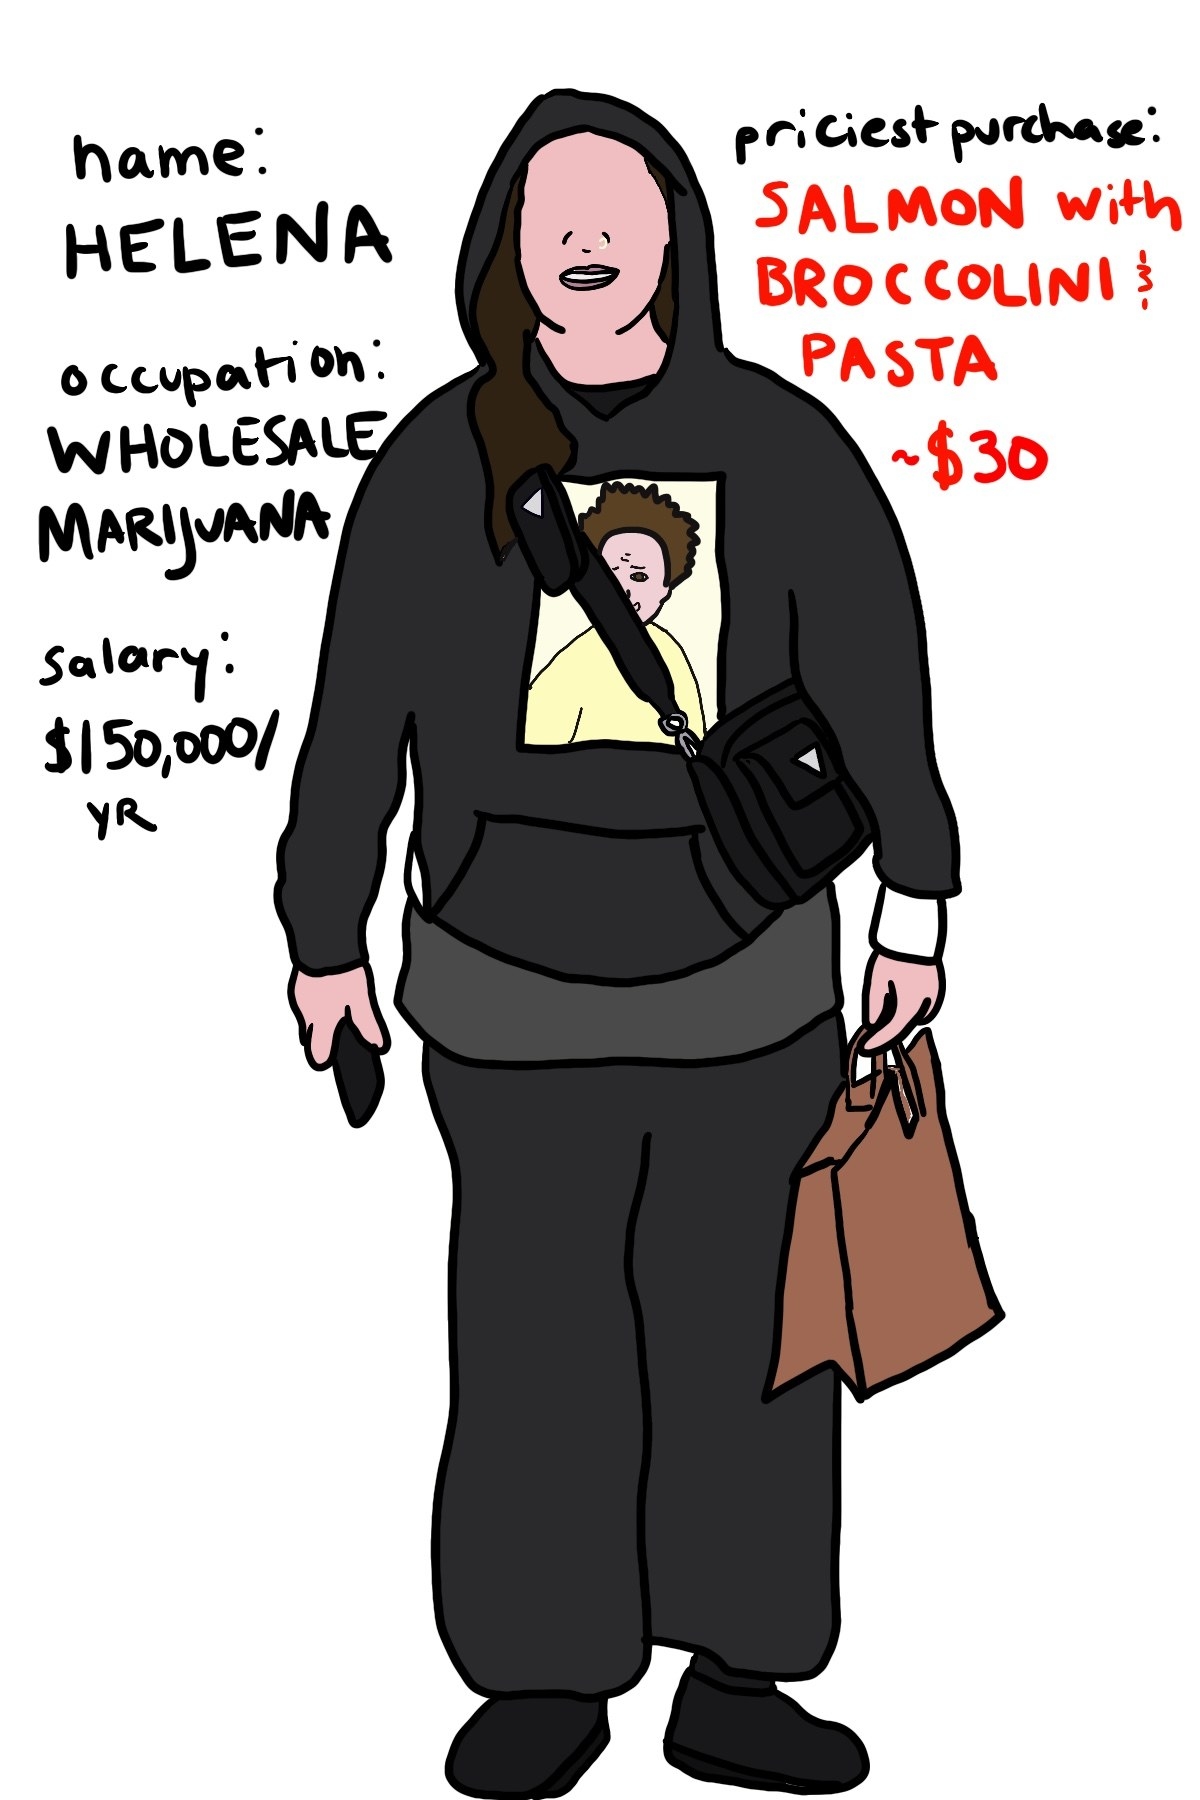 Illustration of customer in hoodie who works in wholesale marijuana, bought a salmon combo plate for $30, and makes $150k a year